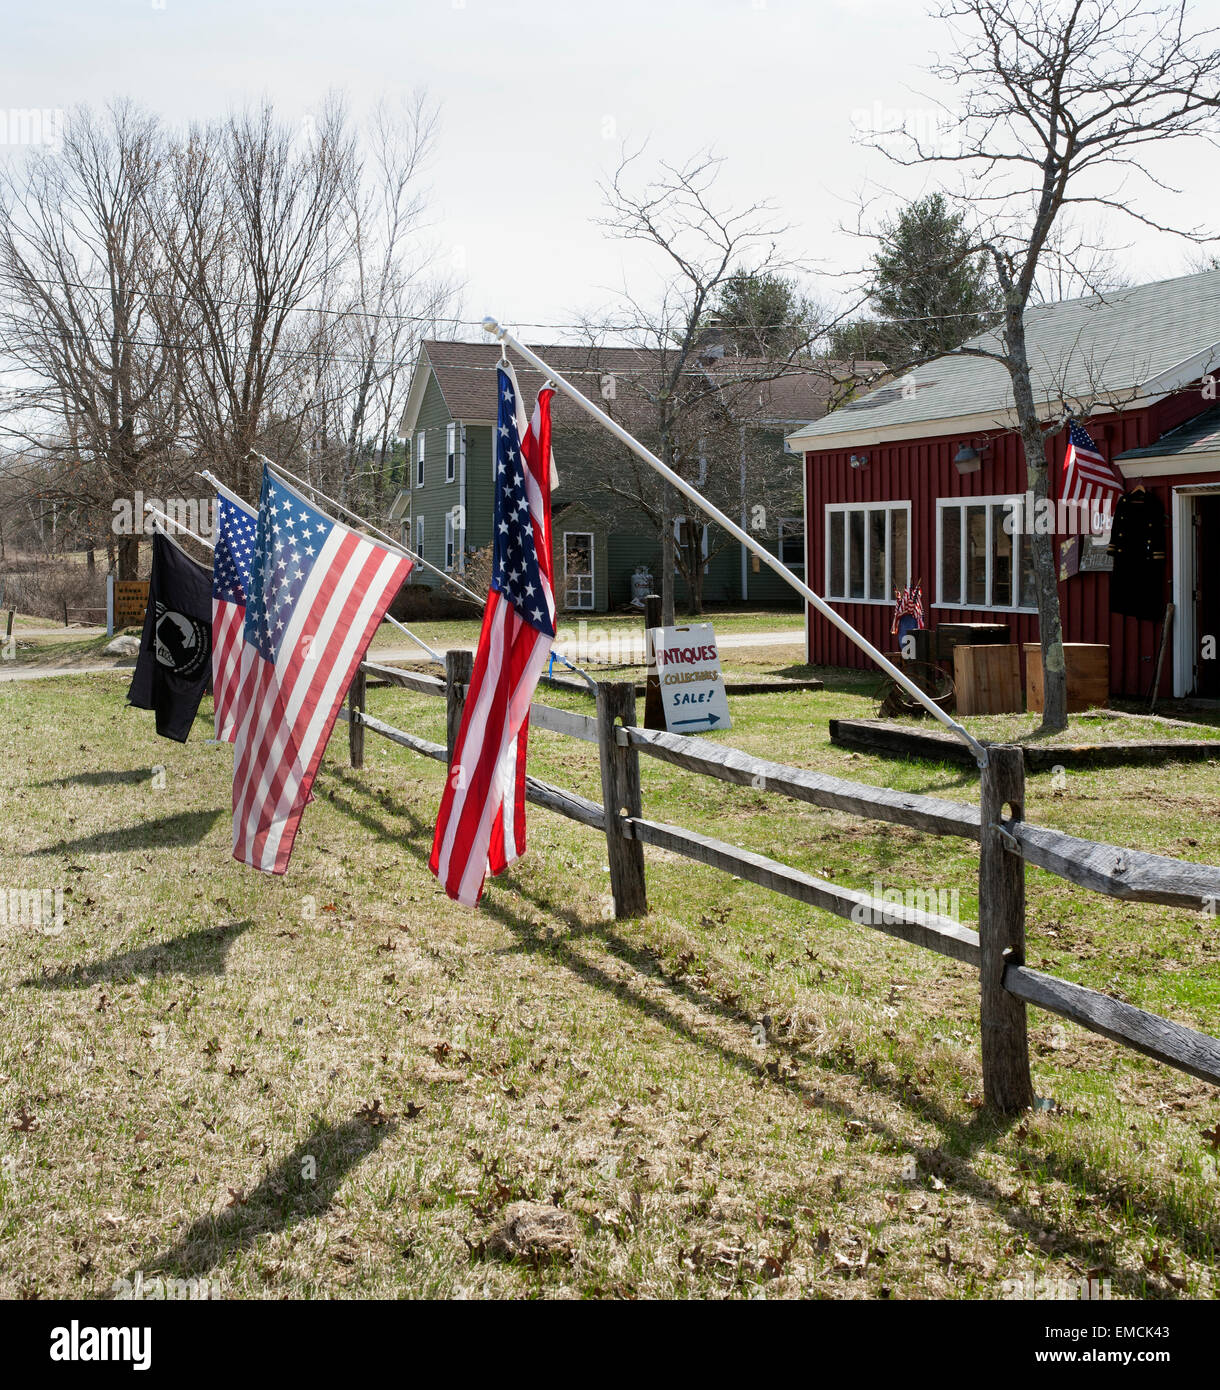 Flags fly in front of a roadside antique store in Vermont on a sunny spring day. Stock Photo